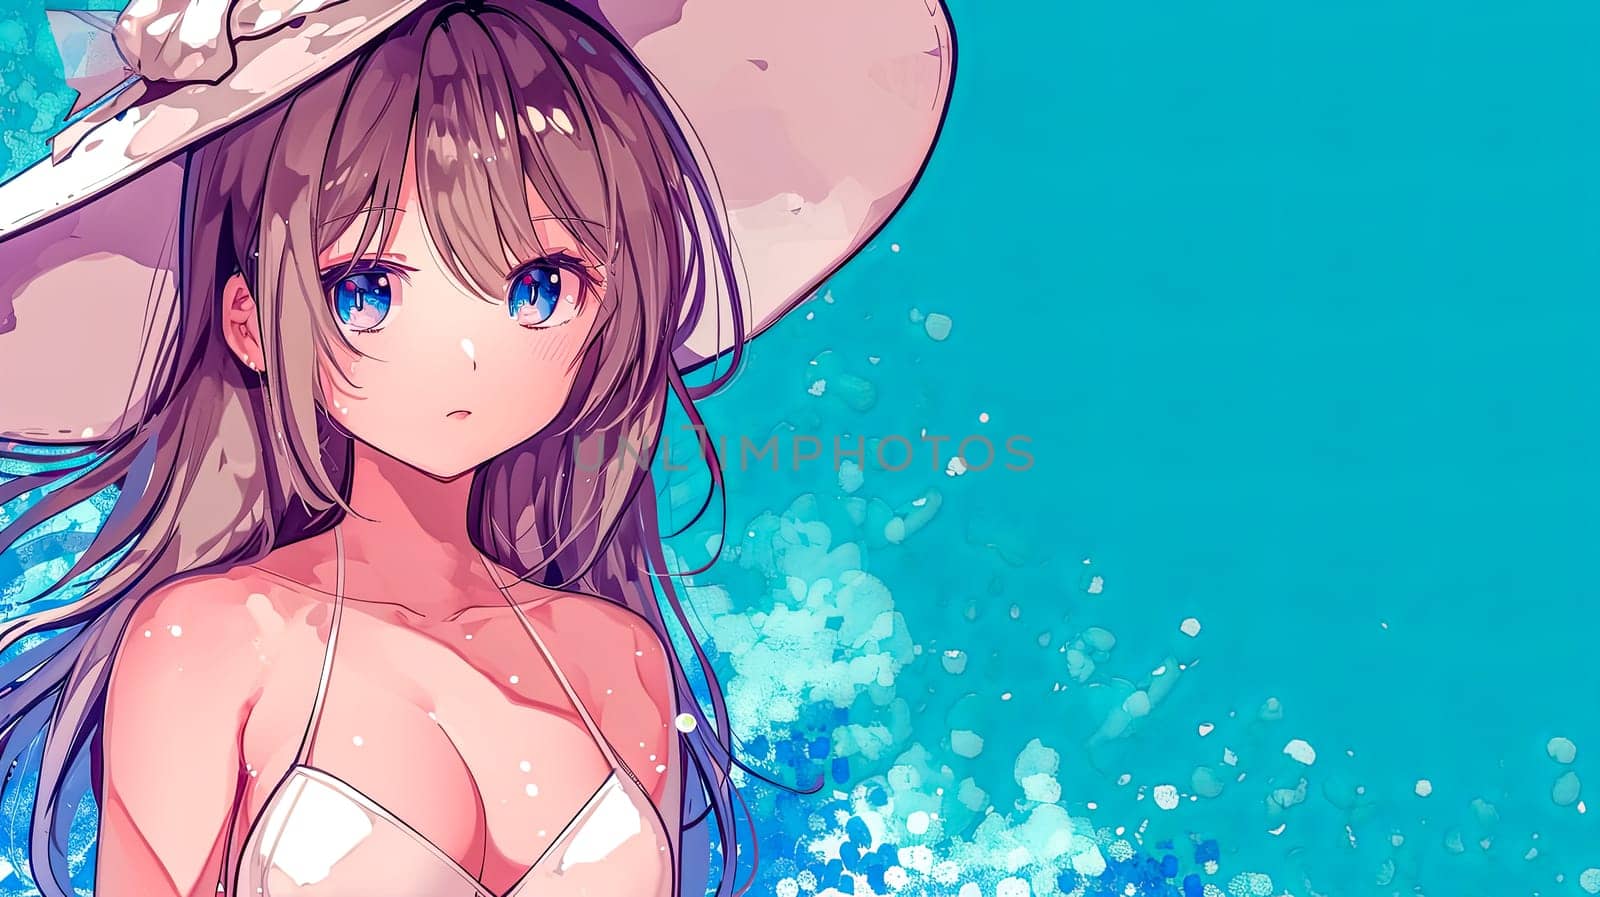 anime style illustration featuring a character with striking blue eyes and long hair, wearing a sun hat and a white bikini, with a blue, watercolor-like backdrop suggesting a beach or poolside theme by Edophoto